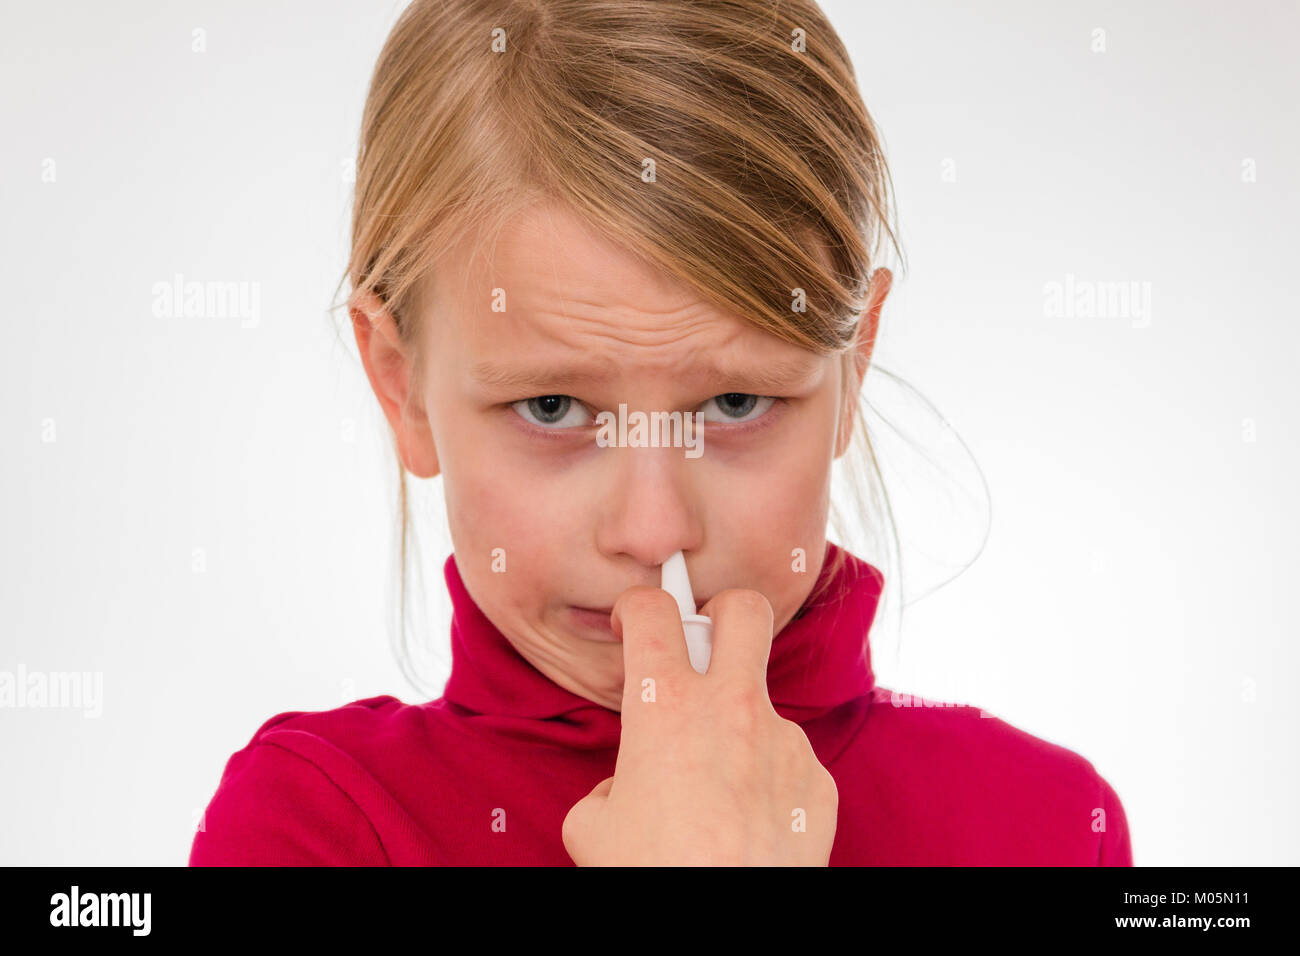 6 year old girl is using nose spray looking worried and frightened Stock Photo